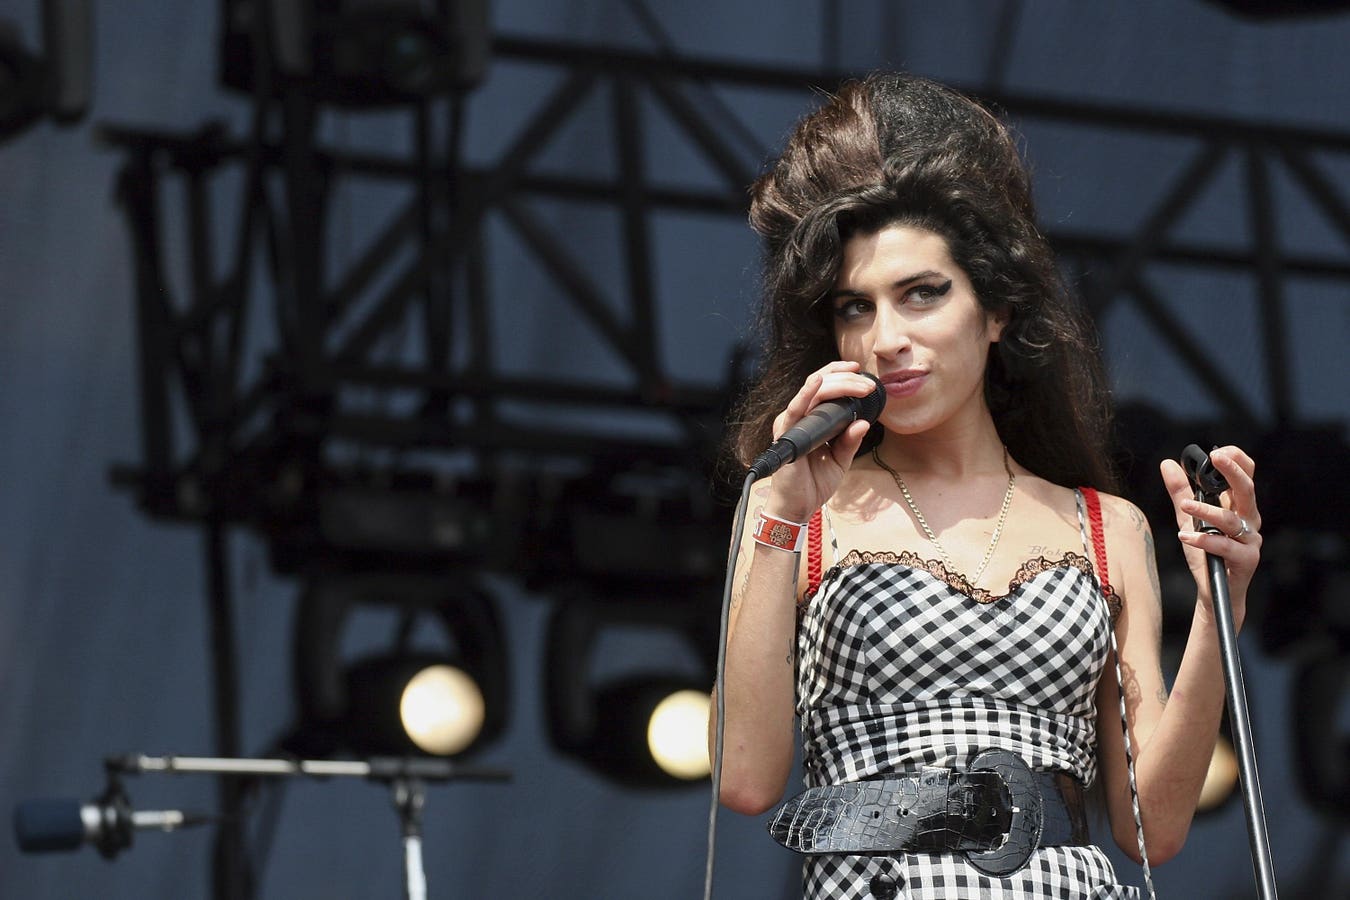 The Amy Winehouse Movie Has Released Its First Trailer: Watch Now